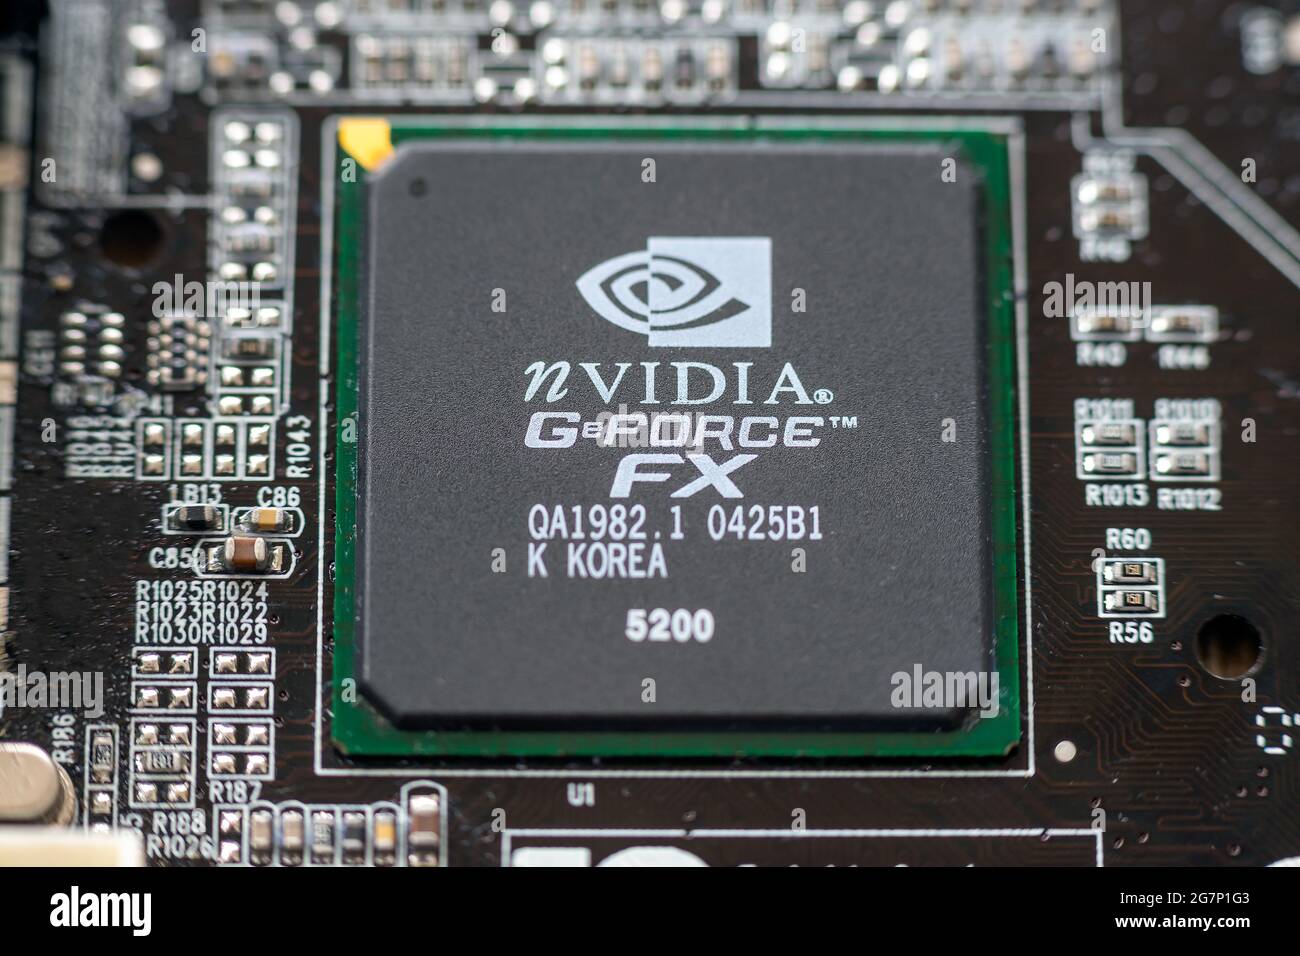 Nvidia Geforce High Resolution Stock Photography and Images - Alamy